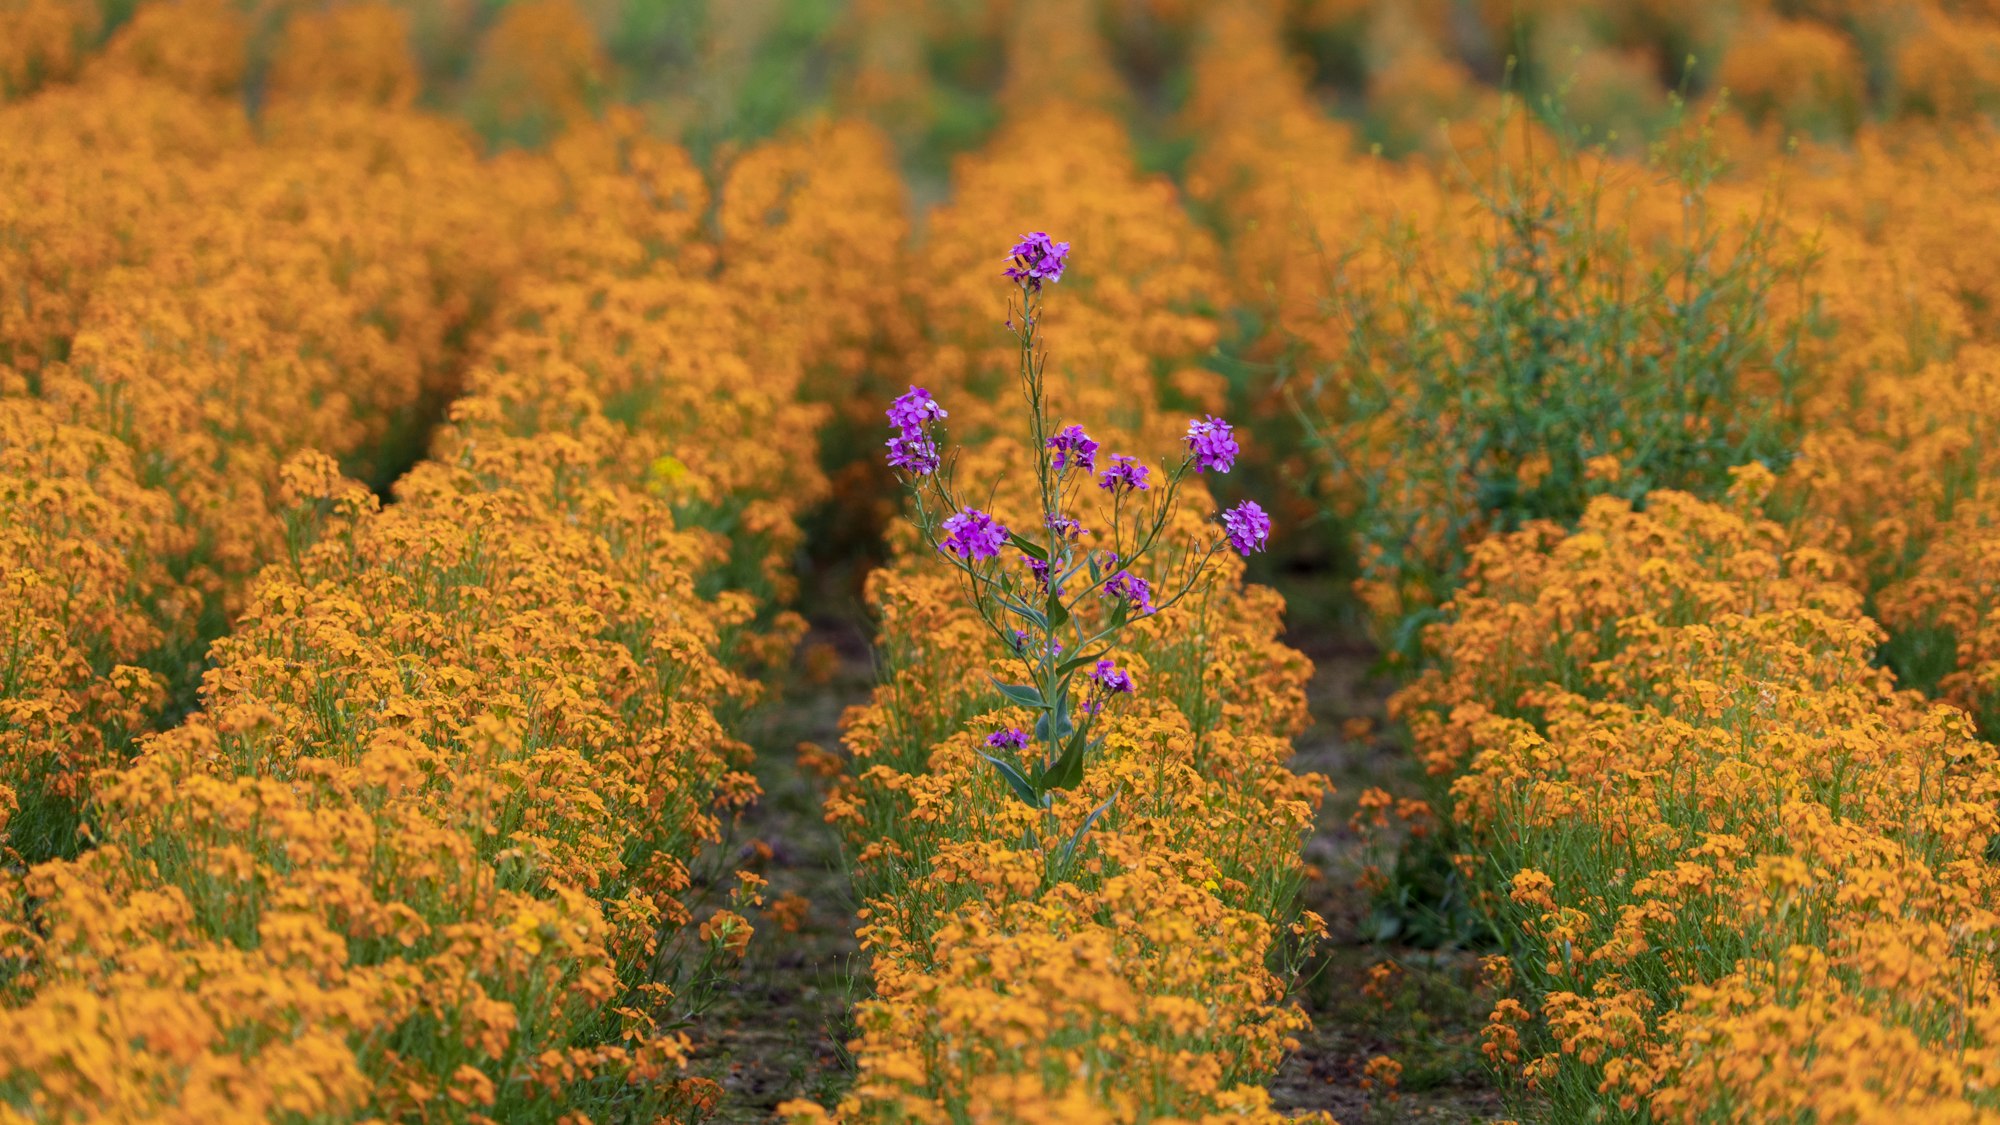 I think there's a good metaphor here for standing out or being yourself. There's a short window when all the huge fields of flowers bloom in the Willamette Valley in Oregon. I drove past a big field of these gold-orange flowers and noticed random specks of purple. I pulled over and saw this magnificent violet-colored flower sticking out in this row of the gold-orange flowers. I cropped this so it can scale down to a standard widescreen desktop background. 